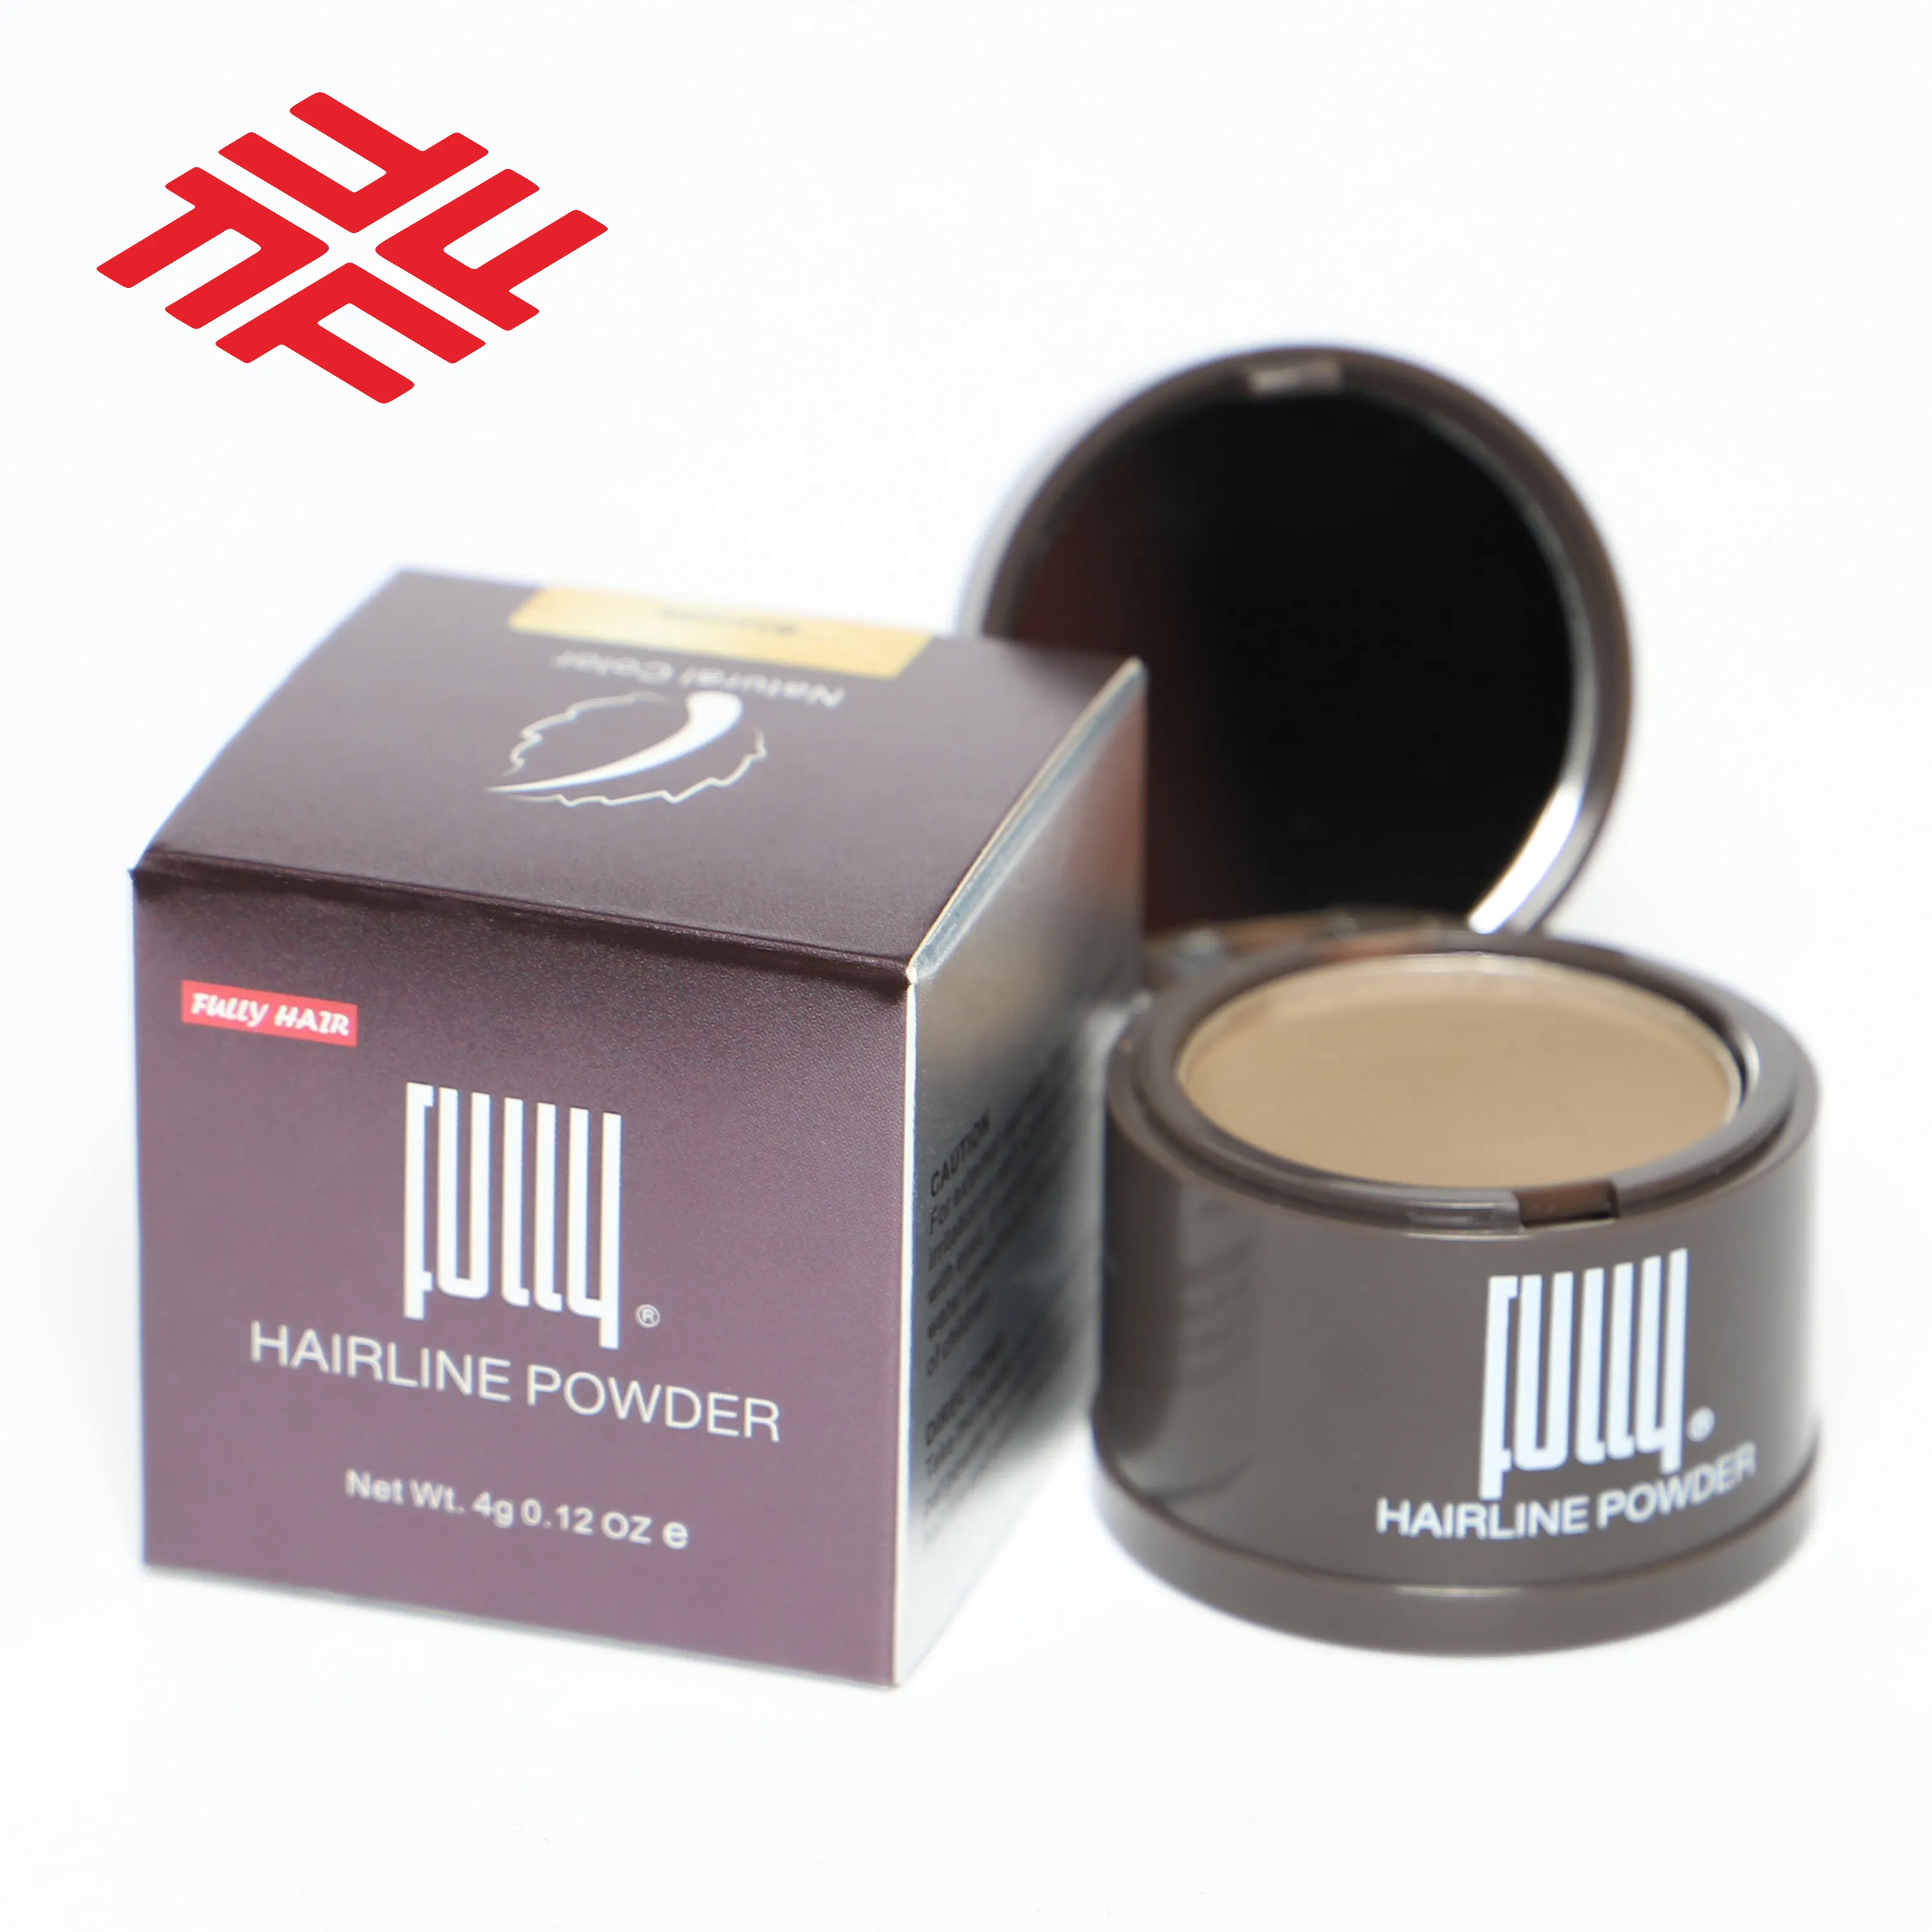 FULLY Hair Loss Treatment Instant Hairline Root Cover Up Shadow Powder Waterproof Concealer